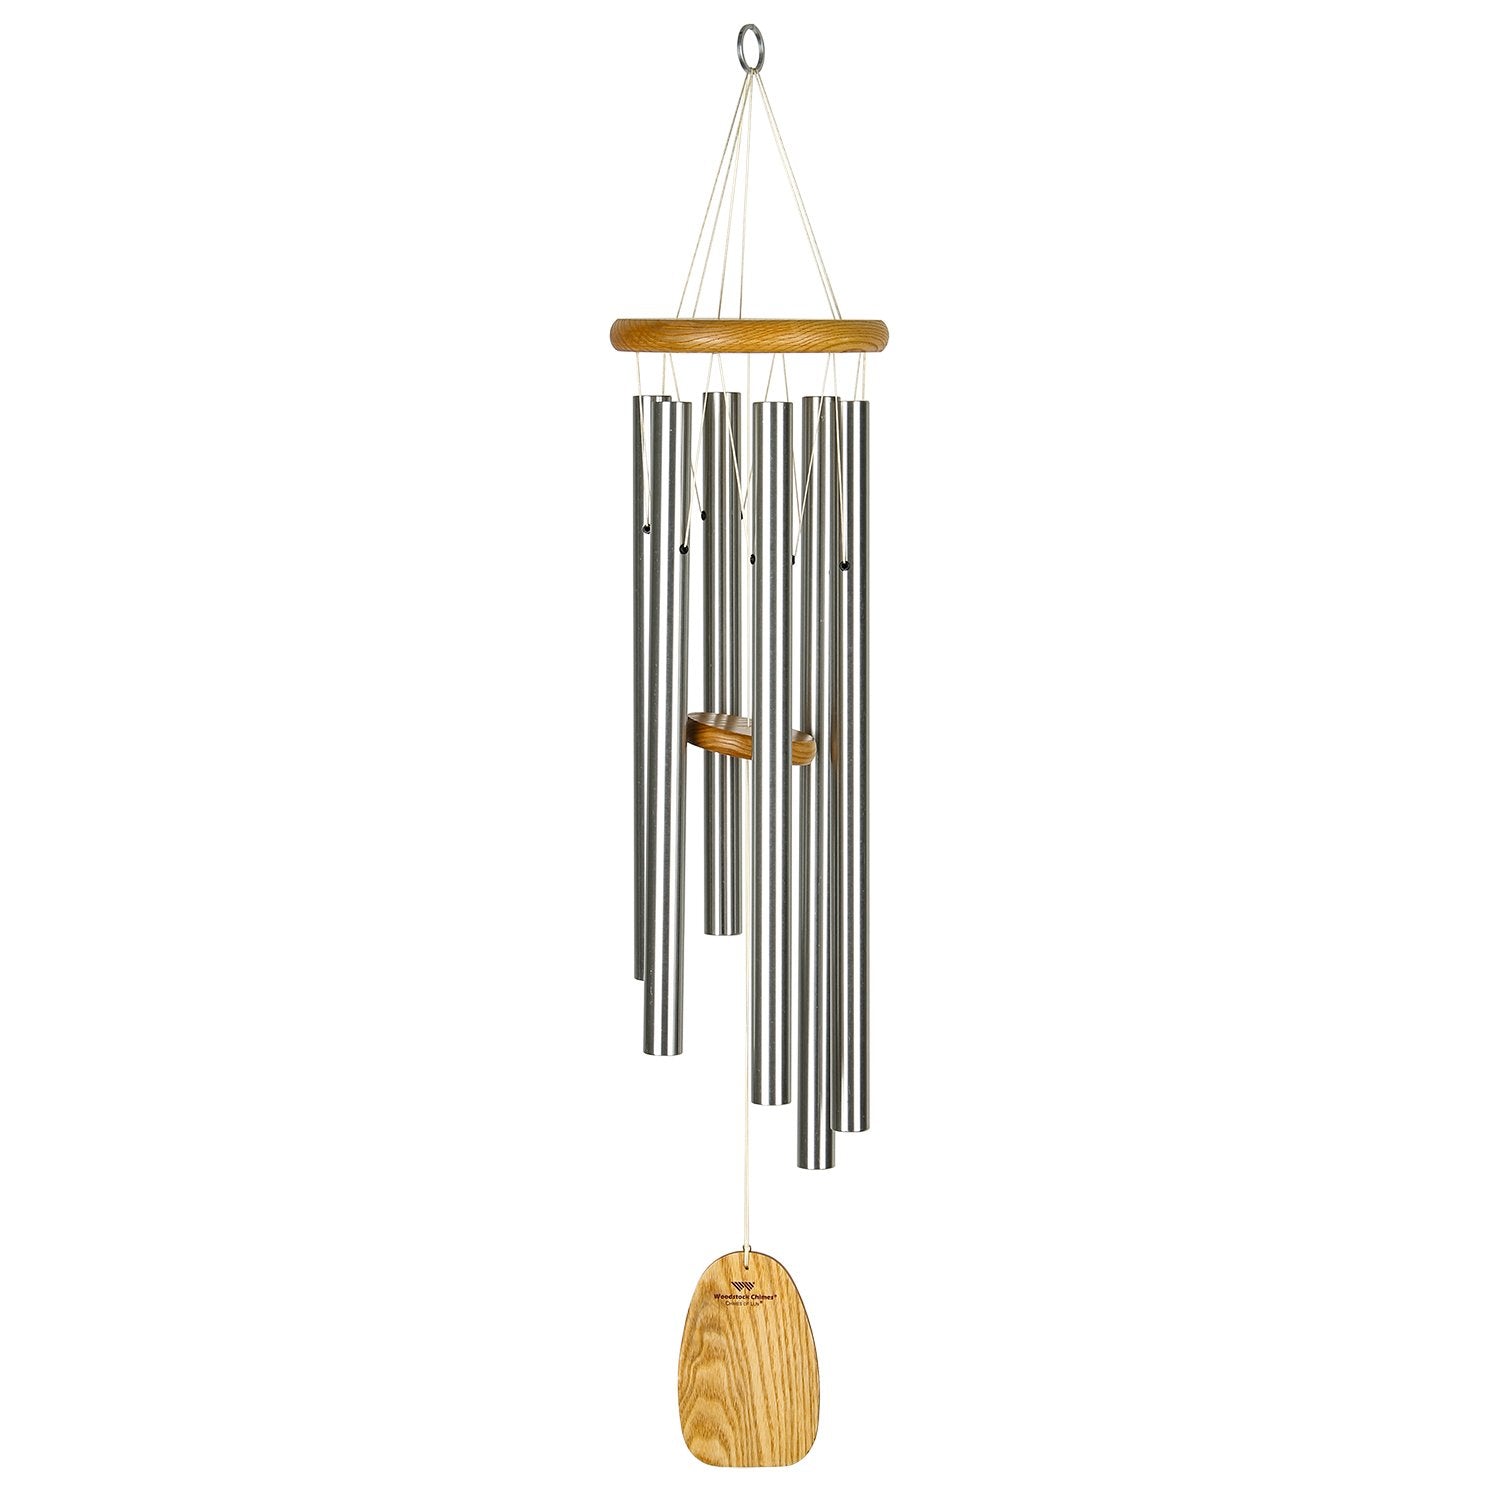 Chimes of Lun by Woodstock Chimes